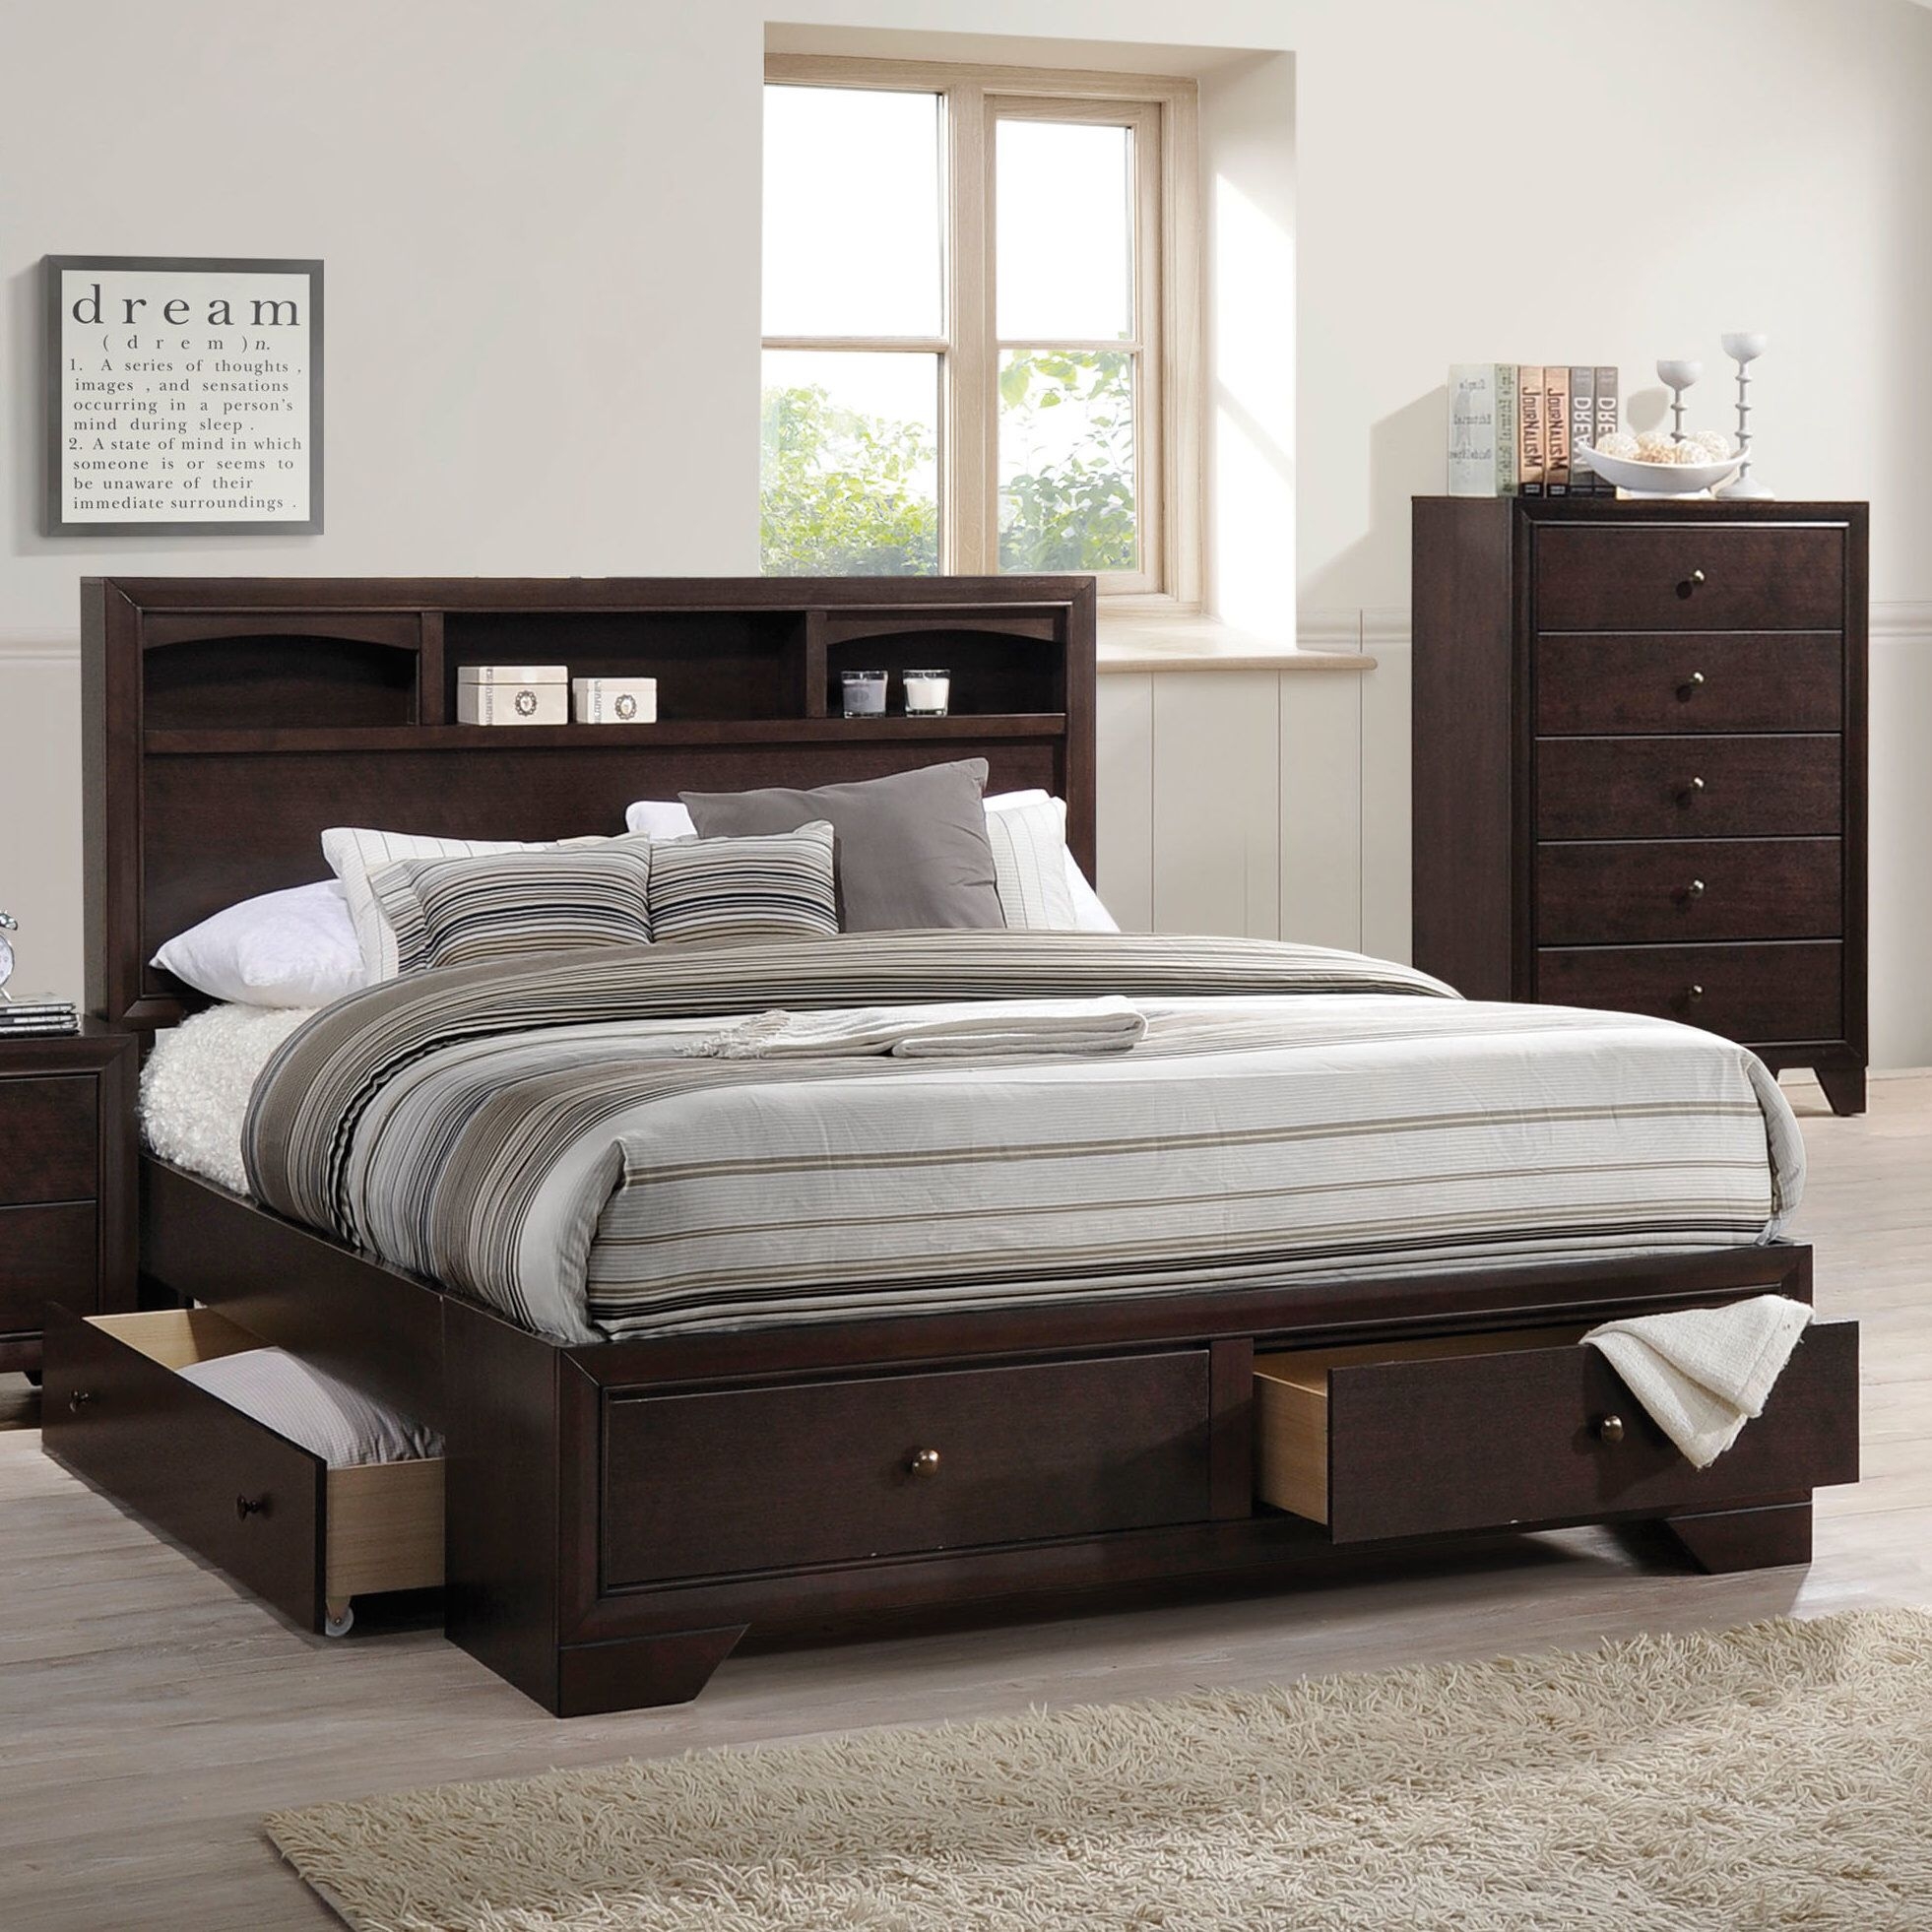 Platform Bed With Drawers Visualhunt, King Size Wood Platform Bed With Storage Drawers